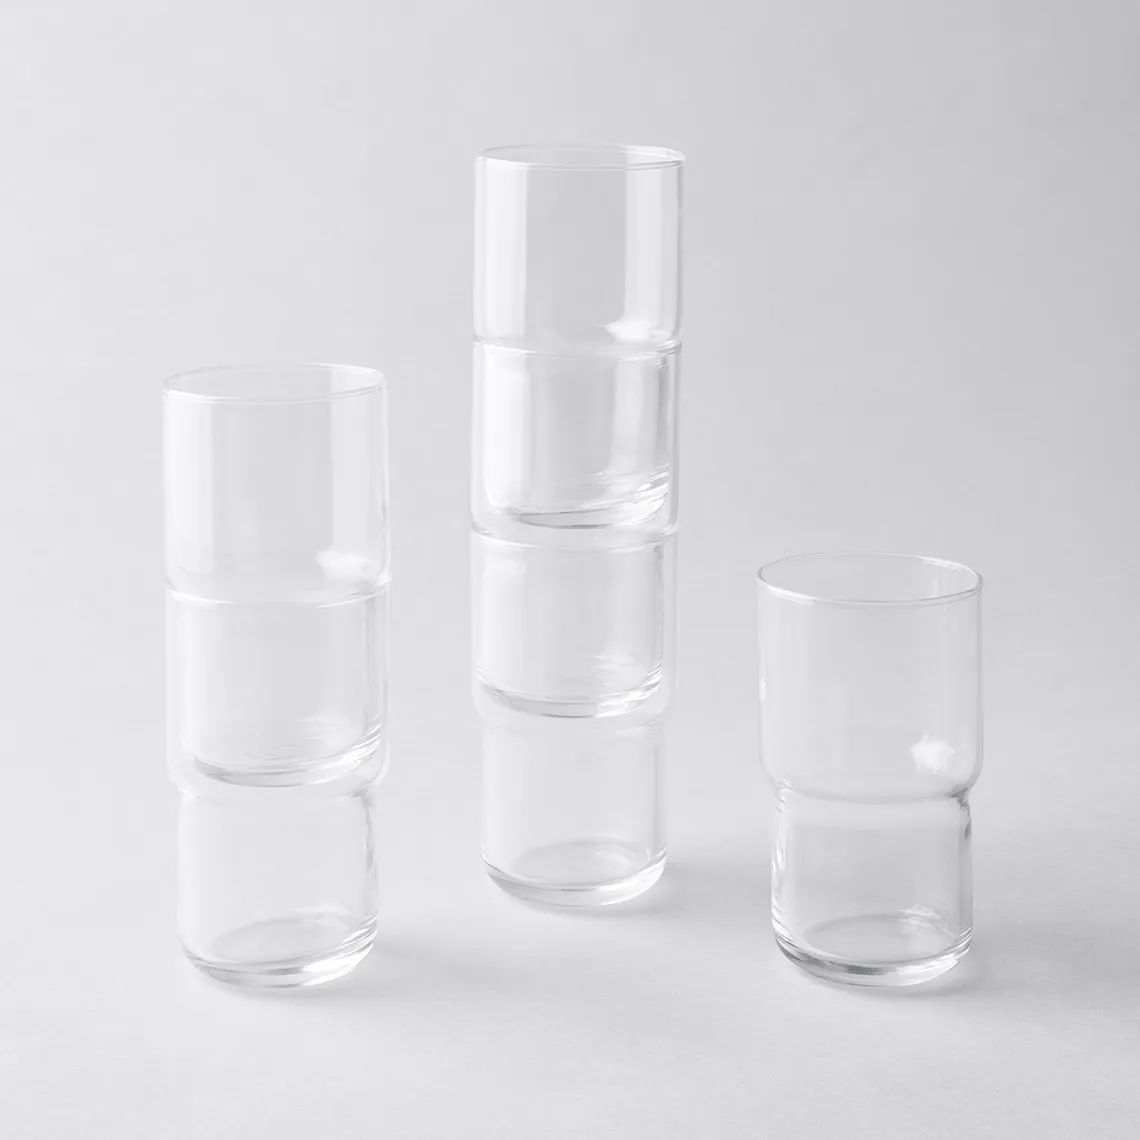 French Tightrope Stackable Glasses | Food52